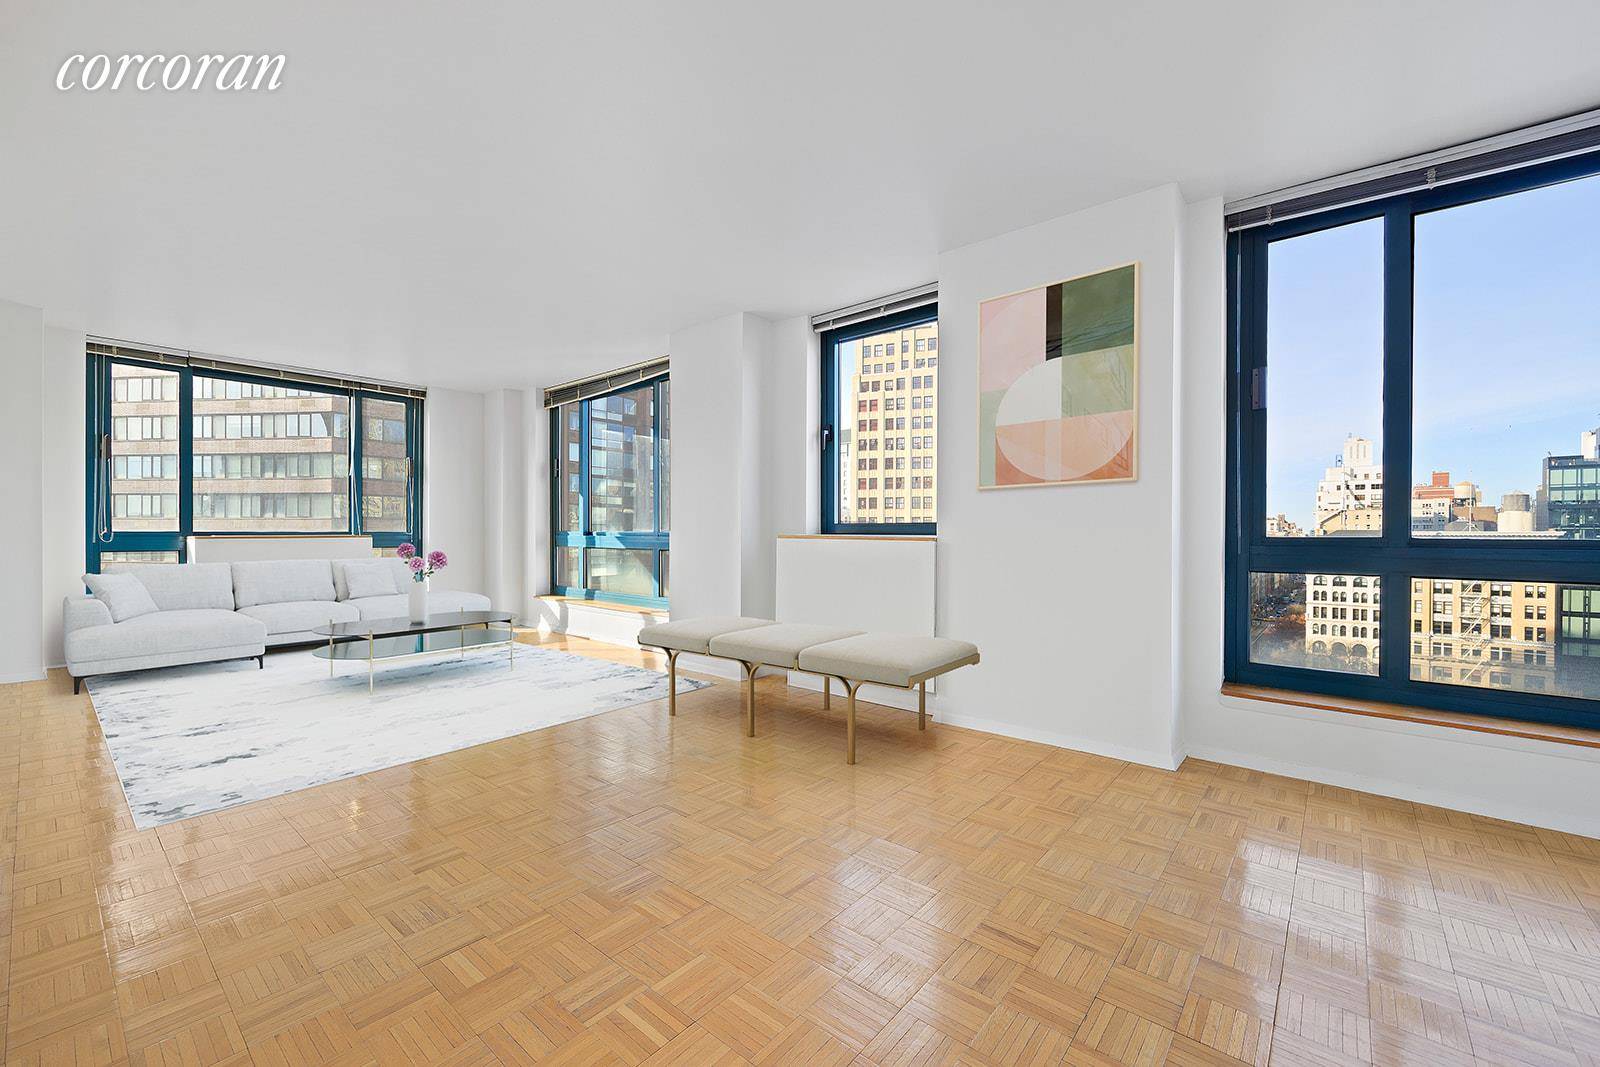 Located on the 12th floor, this corner unit is the largest One Bedroom in the building.